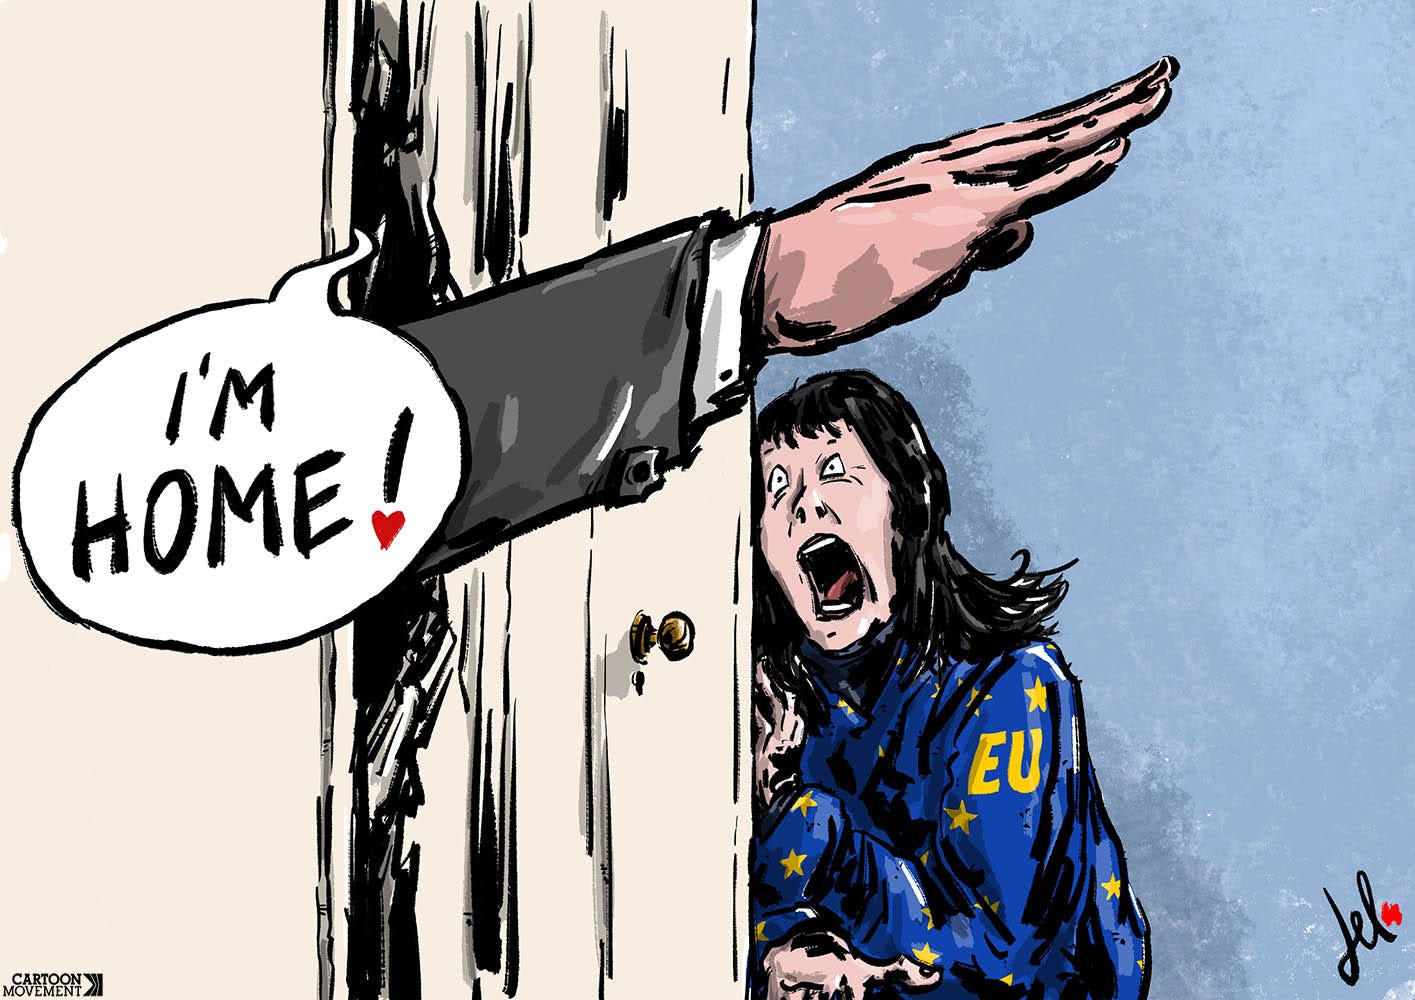 Cartoon showing a famous scene from the movie 'The Shining' where Jack Nicholson breaks down the door. Instead of Nicholson, we see a hand giving the Hitler salute crashing through the door with a speech bubble that says 'I'm home!' While the woman that's cowering on the other side of the door is wearing a dress labeled 'EU'.